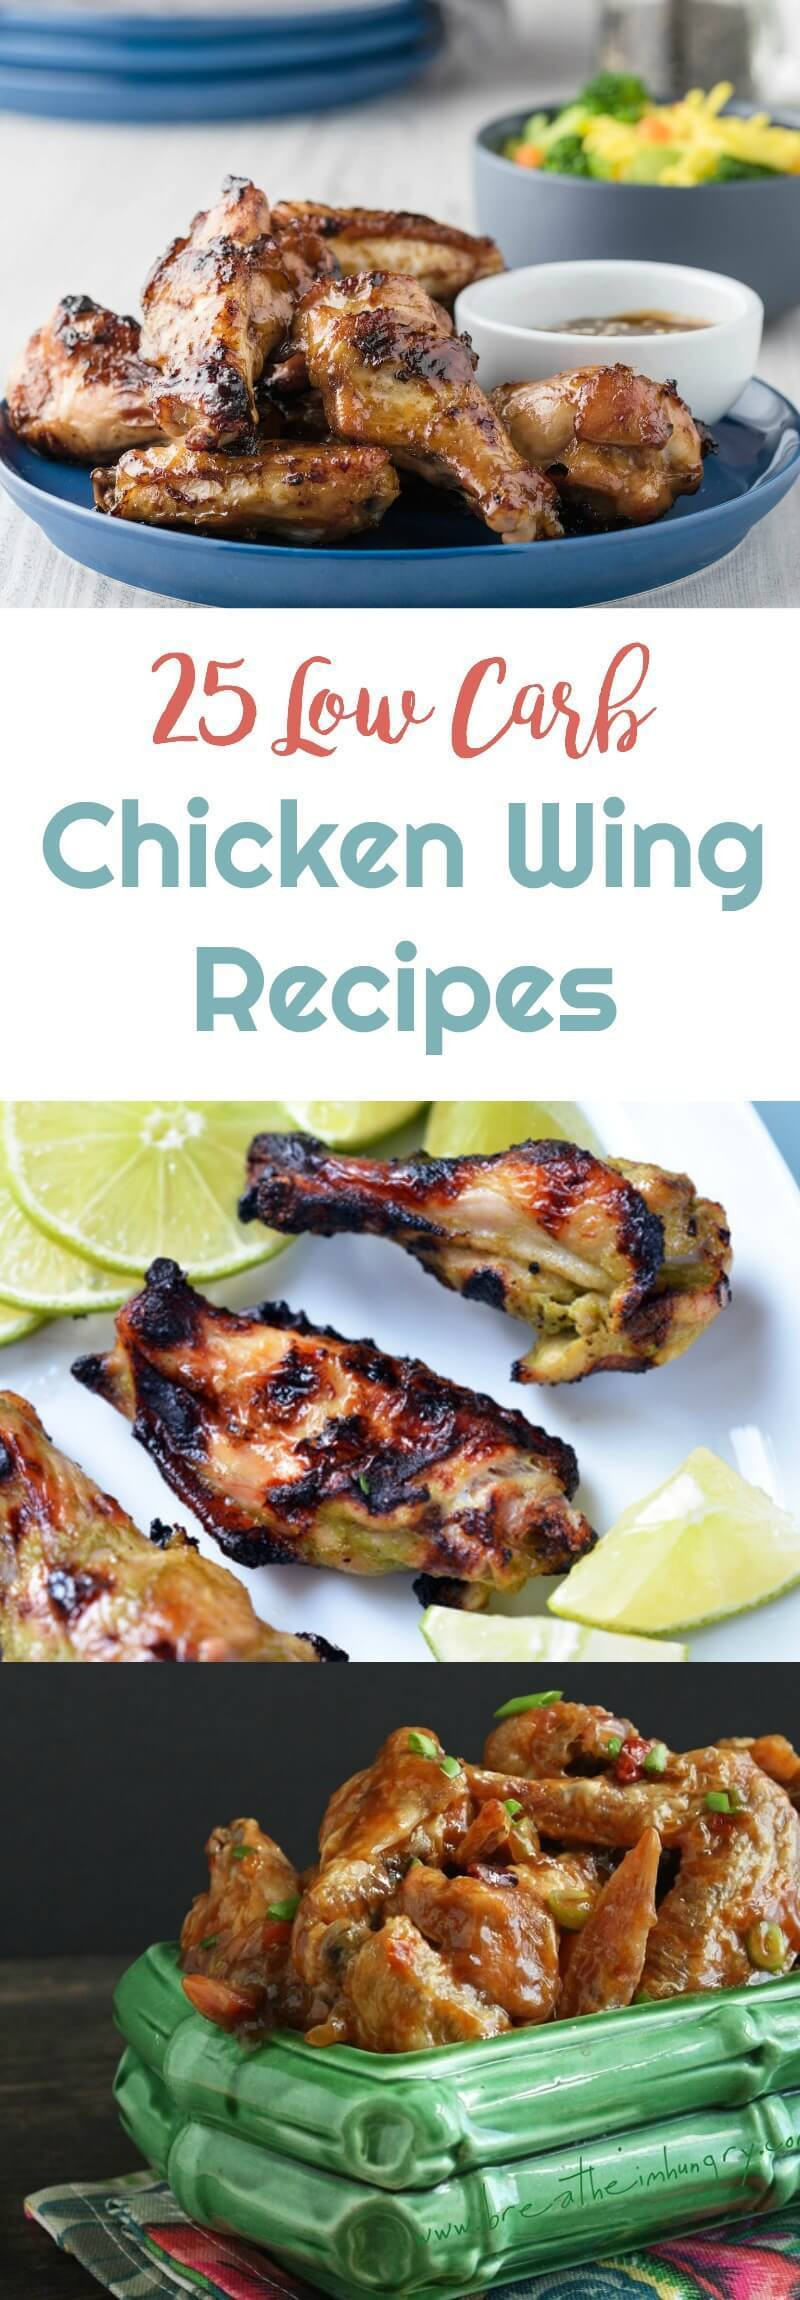 Carbs In Chicken Wings
 25 Low Carb Chicken Wing Recipes